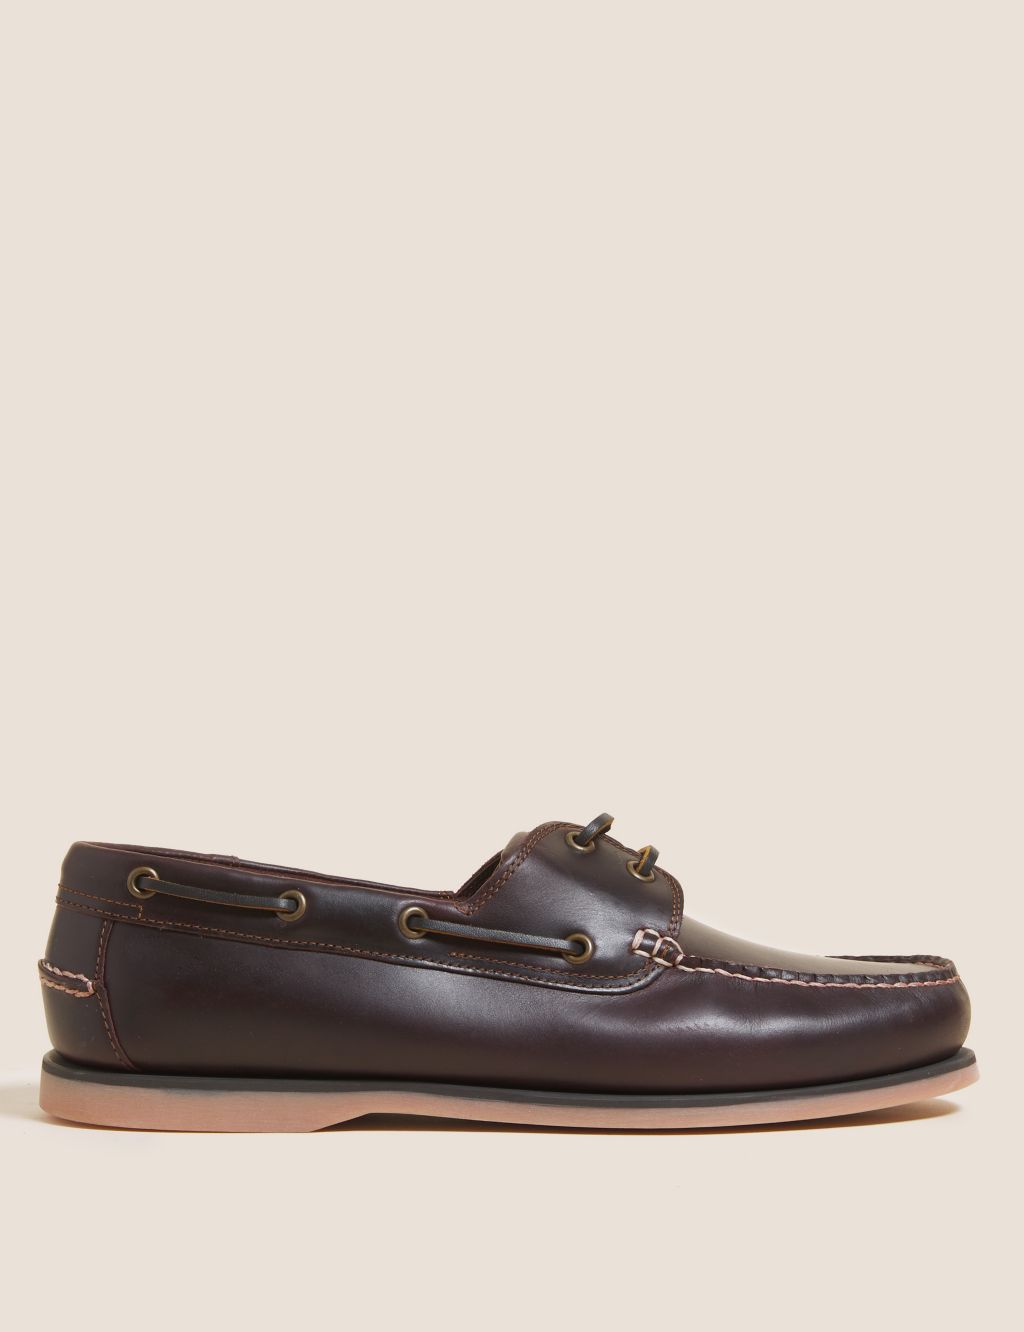 Wide Fit Leather Boat Shoes image 1